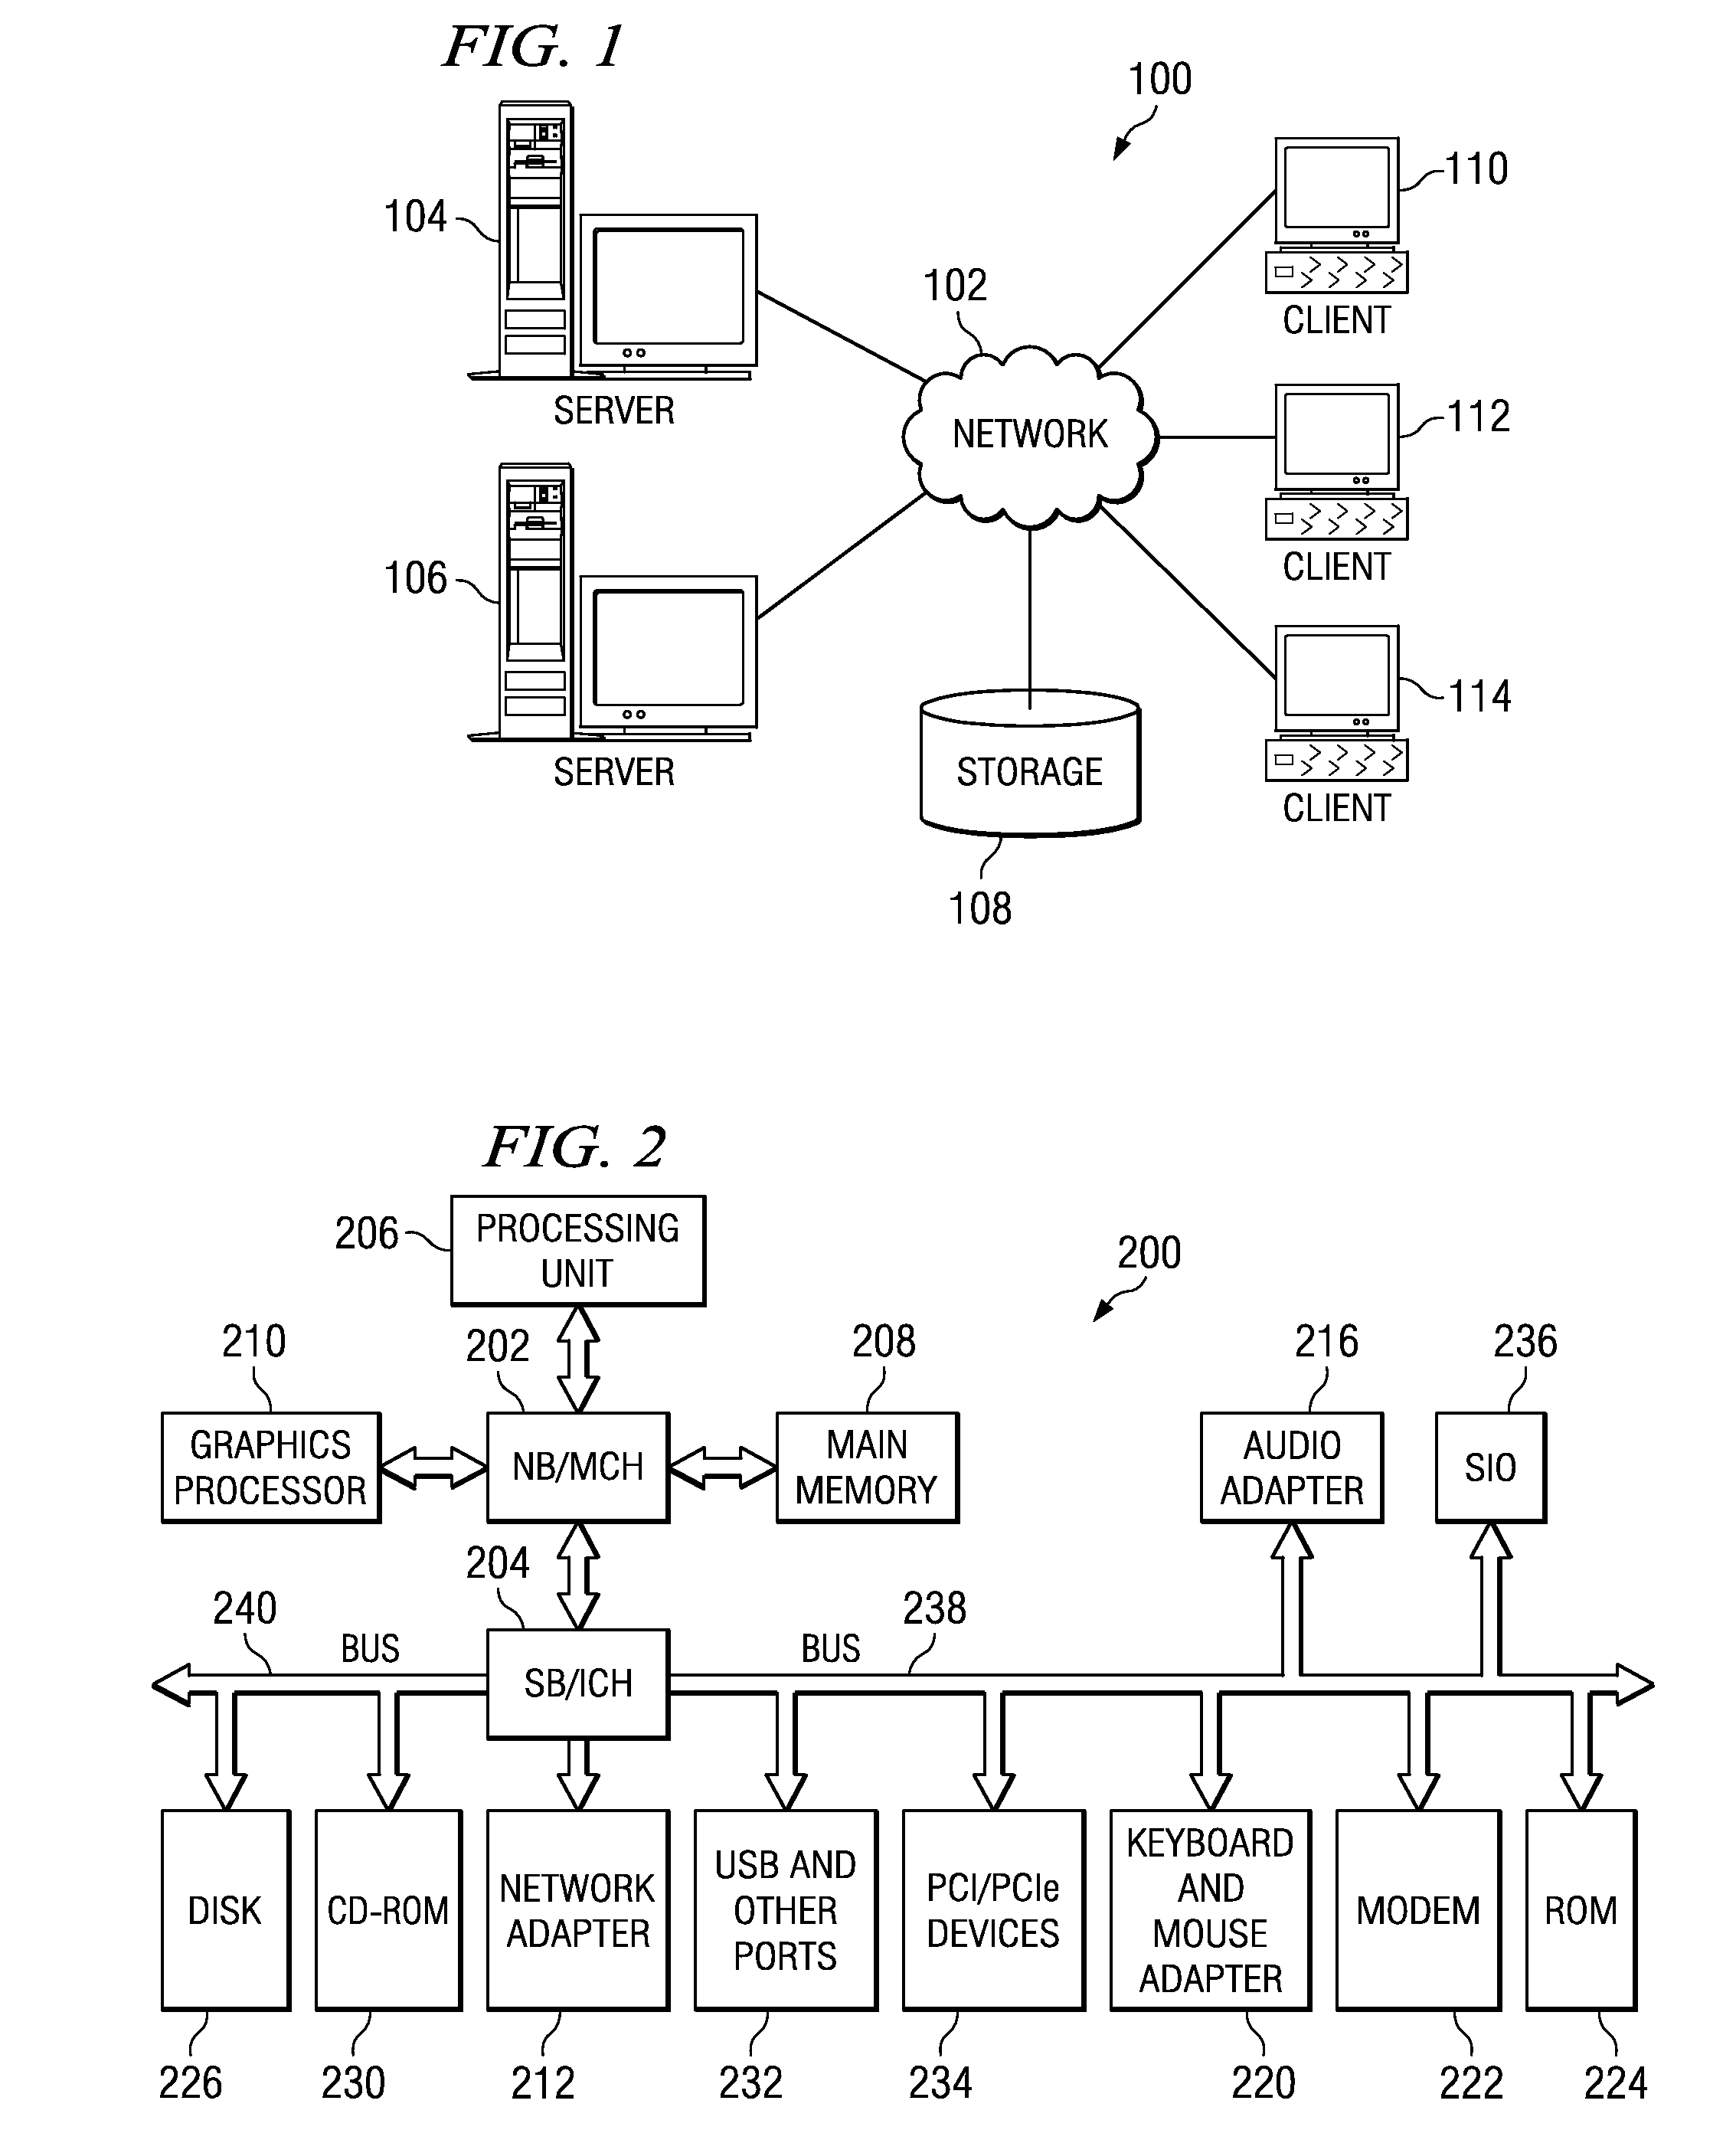 System and method for optimizing project subdivision using data and requirements focuses subject to multidimensional constraints